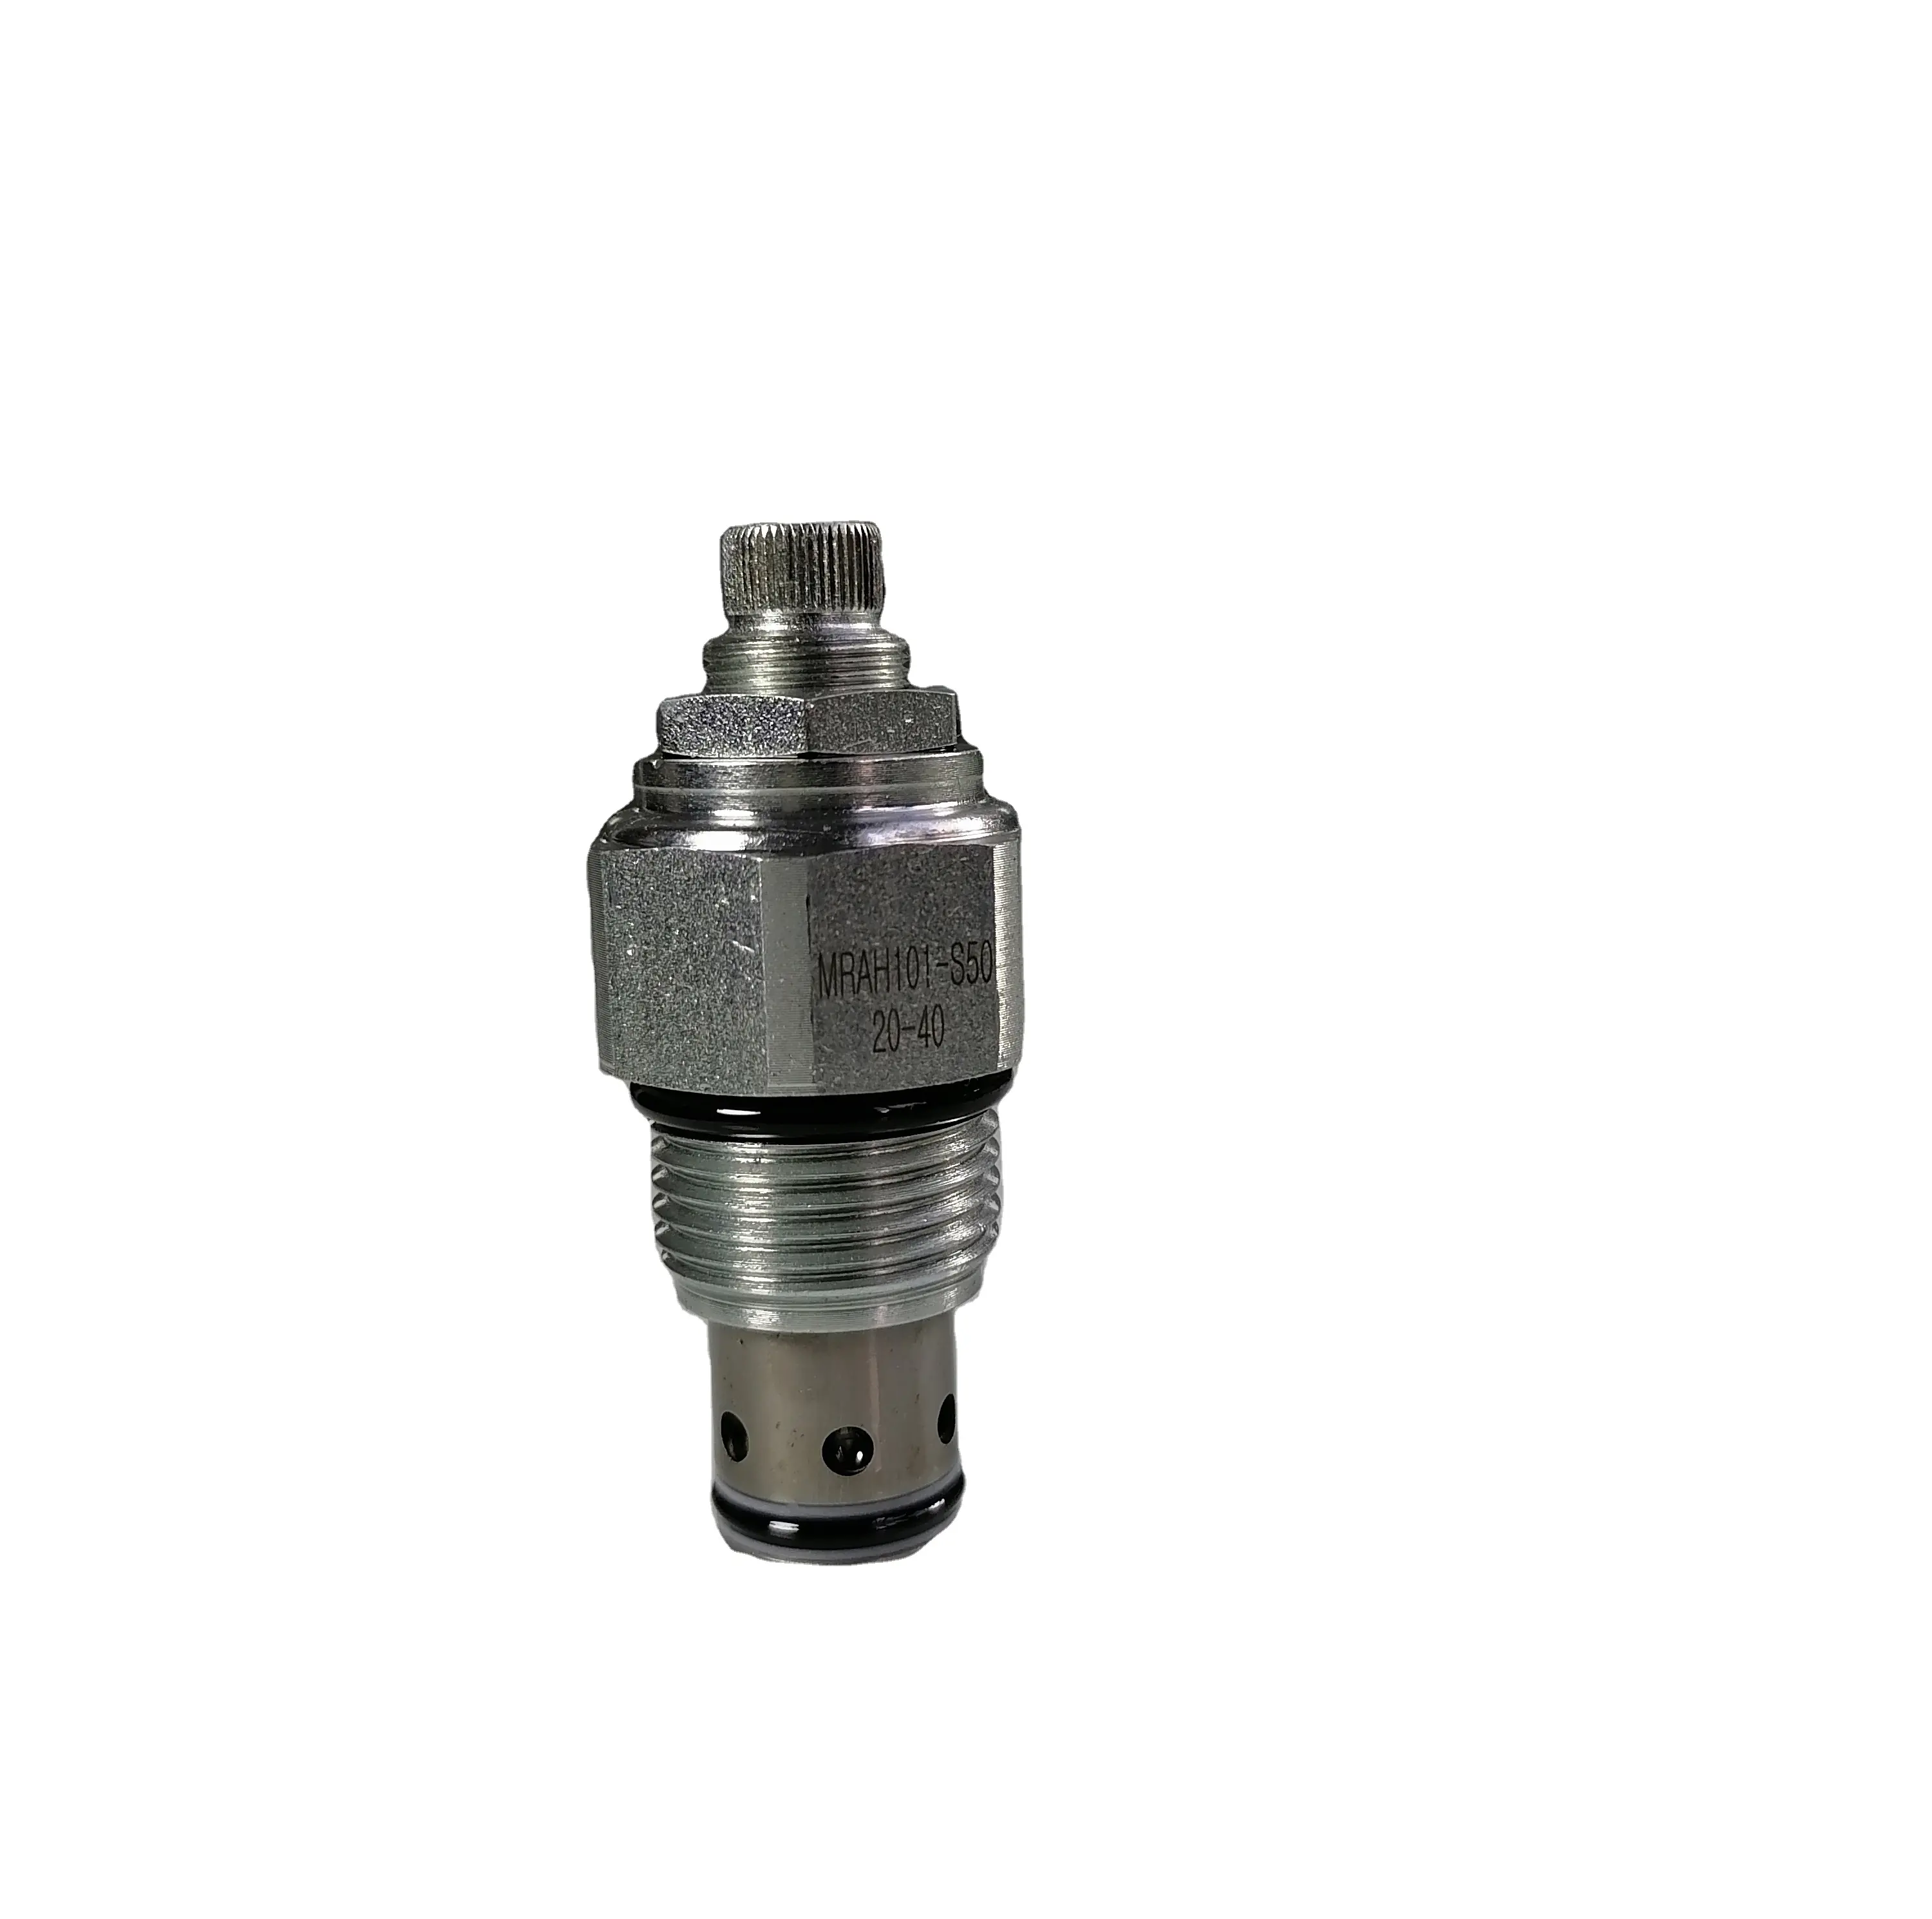 Parker pilot operated relief valves safety duty applications great stability RAH101S50 Threaded cartridge hydraulic valve